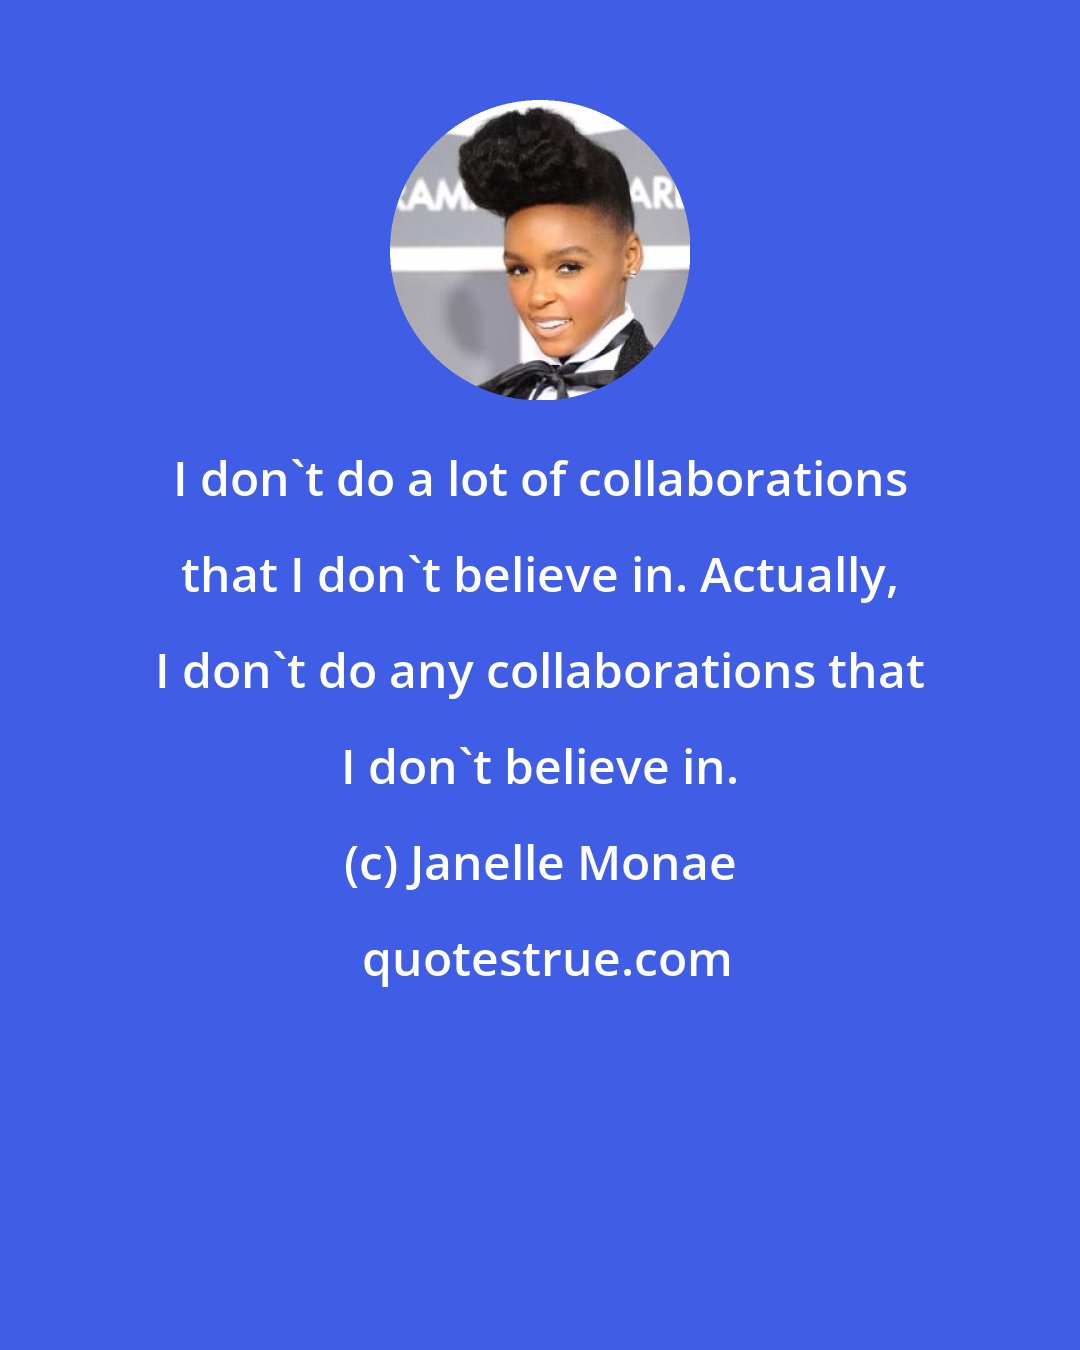 Janelle Monae: I don't do a lot of collaborations that I don't believe in. Actually, I don't do any collaborations that I don't believe in.